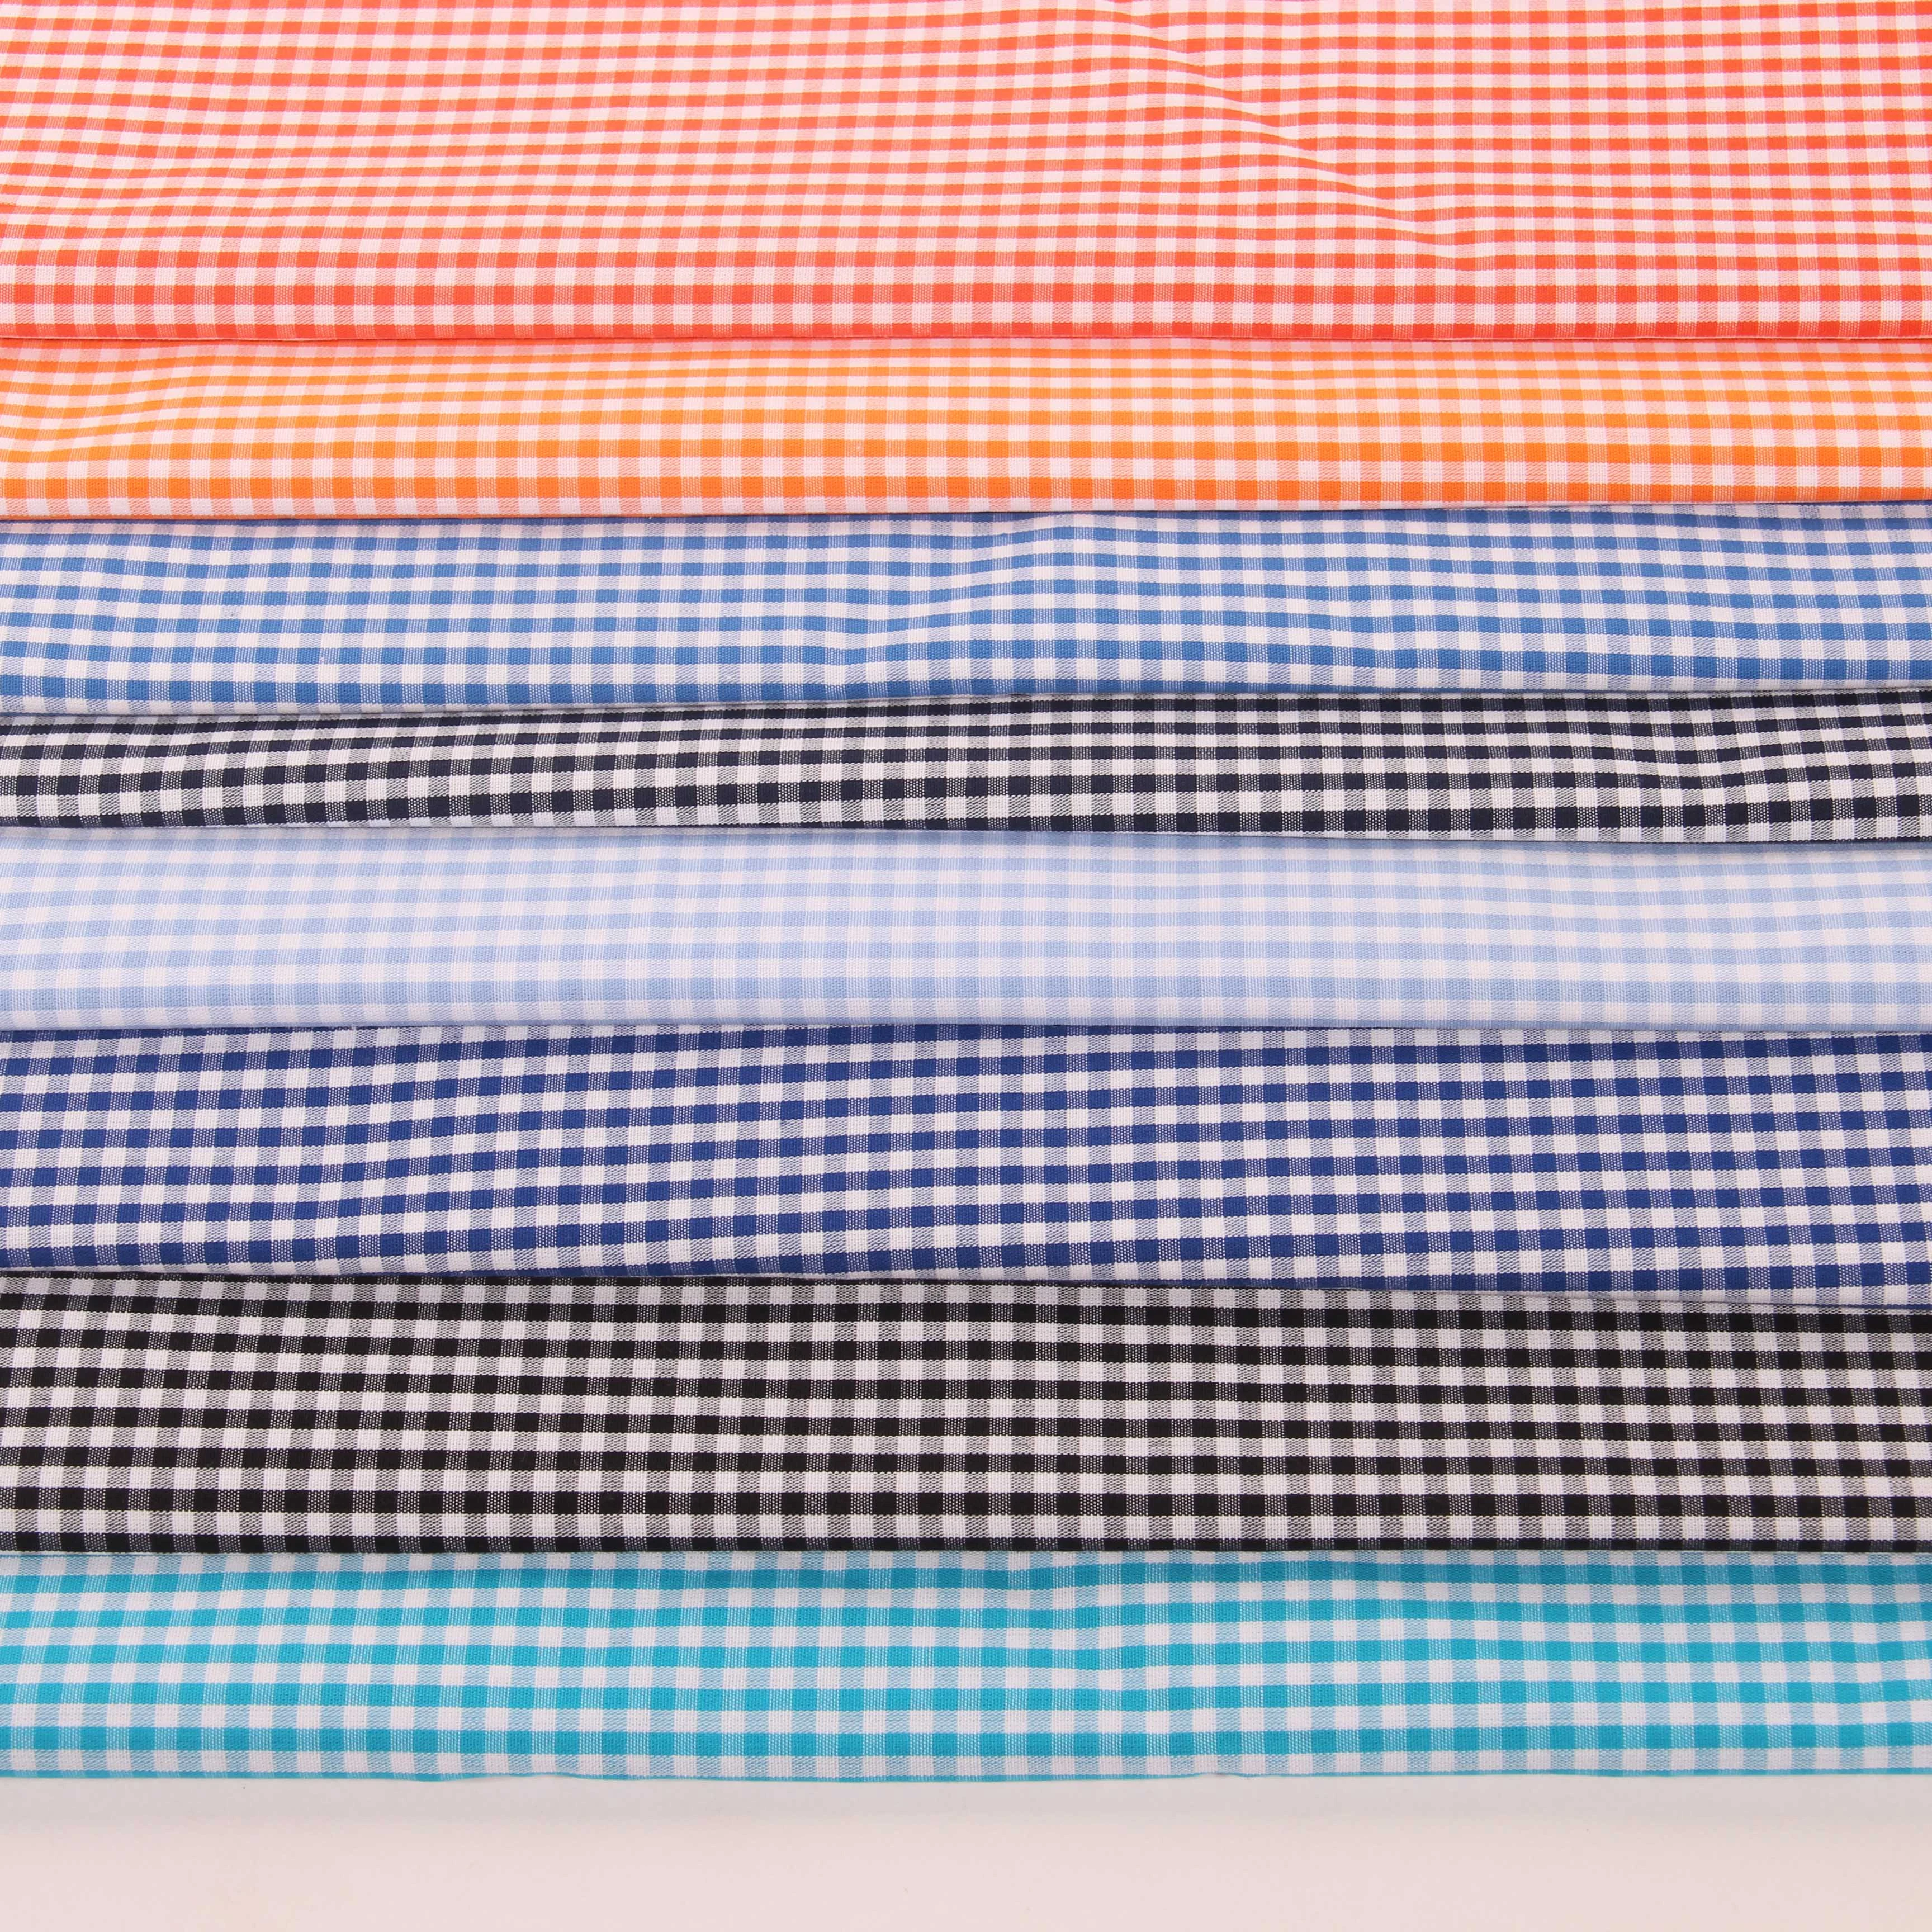 100% cotton classic Chaoyang check series in stock yarn dyed fabric